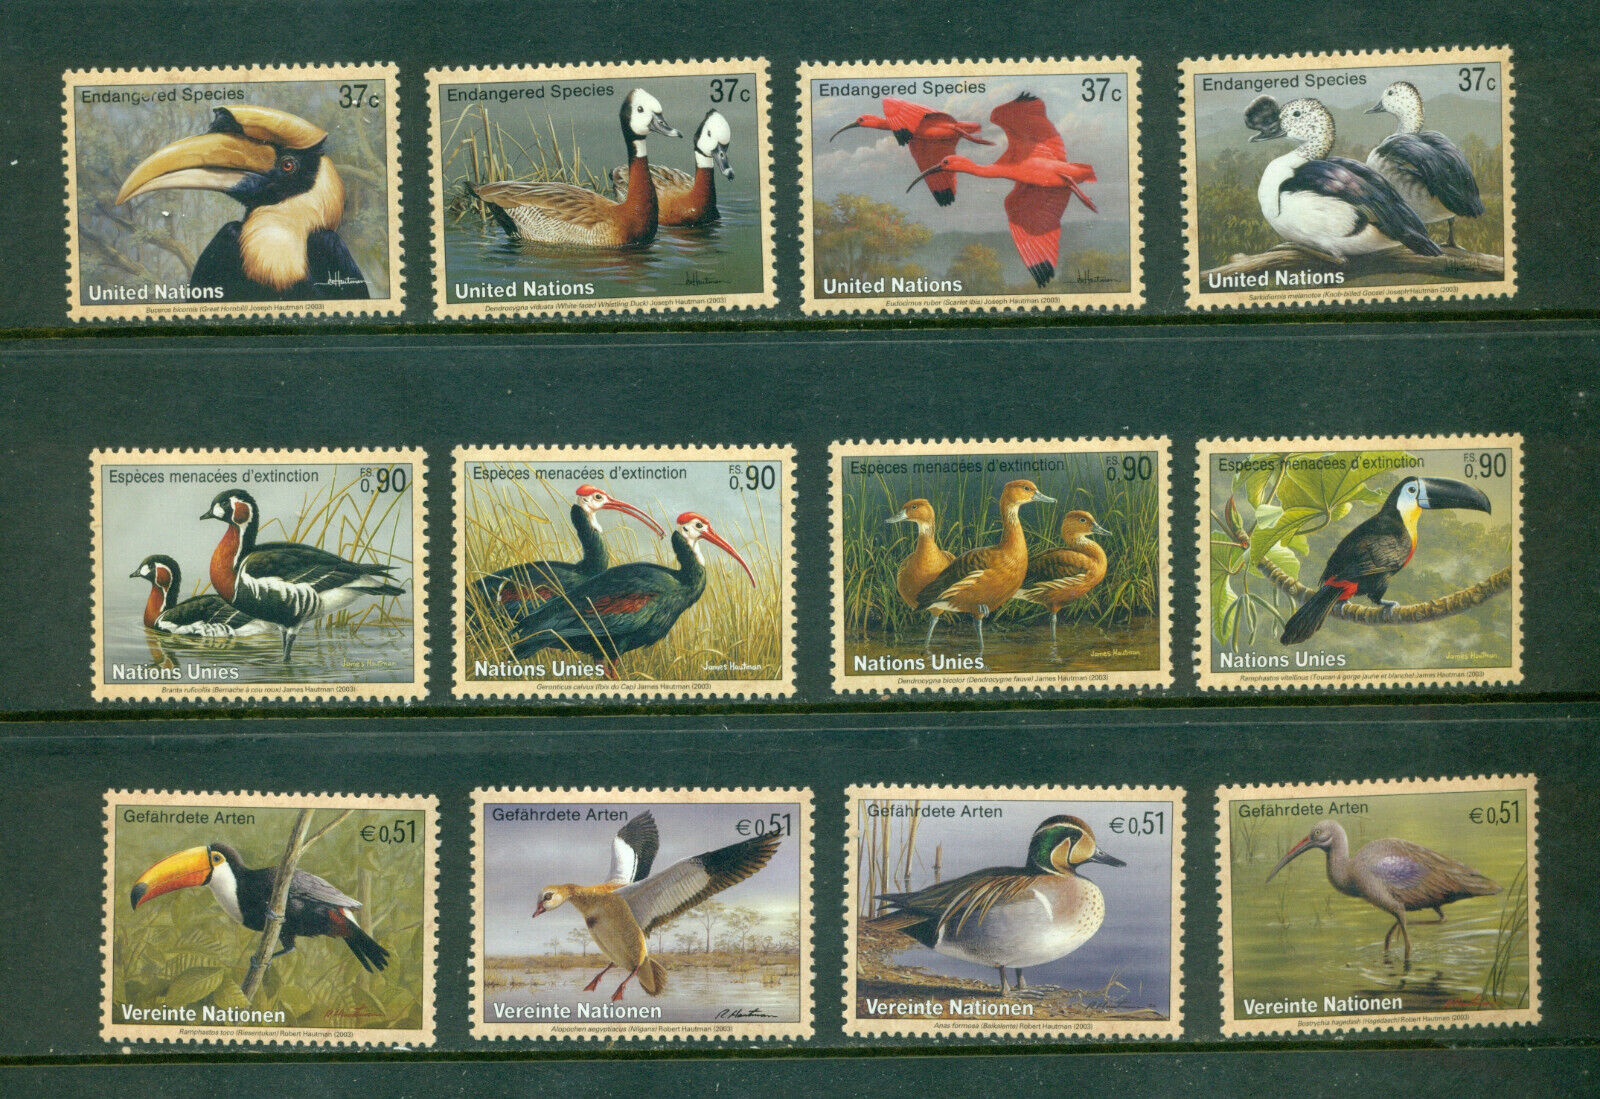 2003 Set of 12 Stamps honoring Endangered Species United Nations all 3 Offices